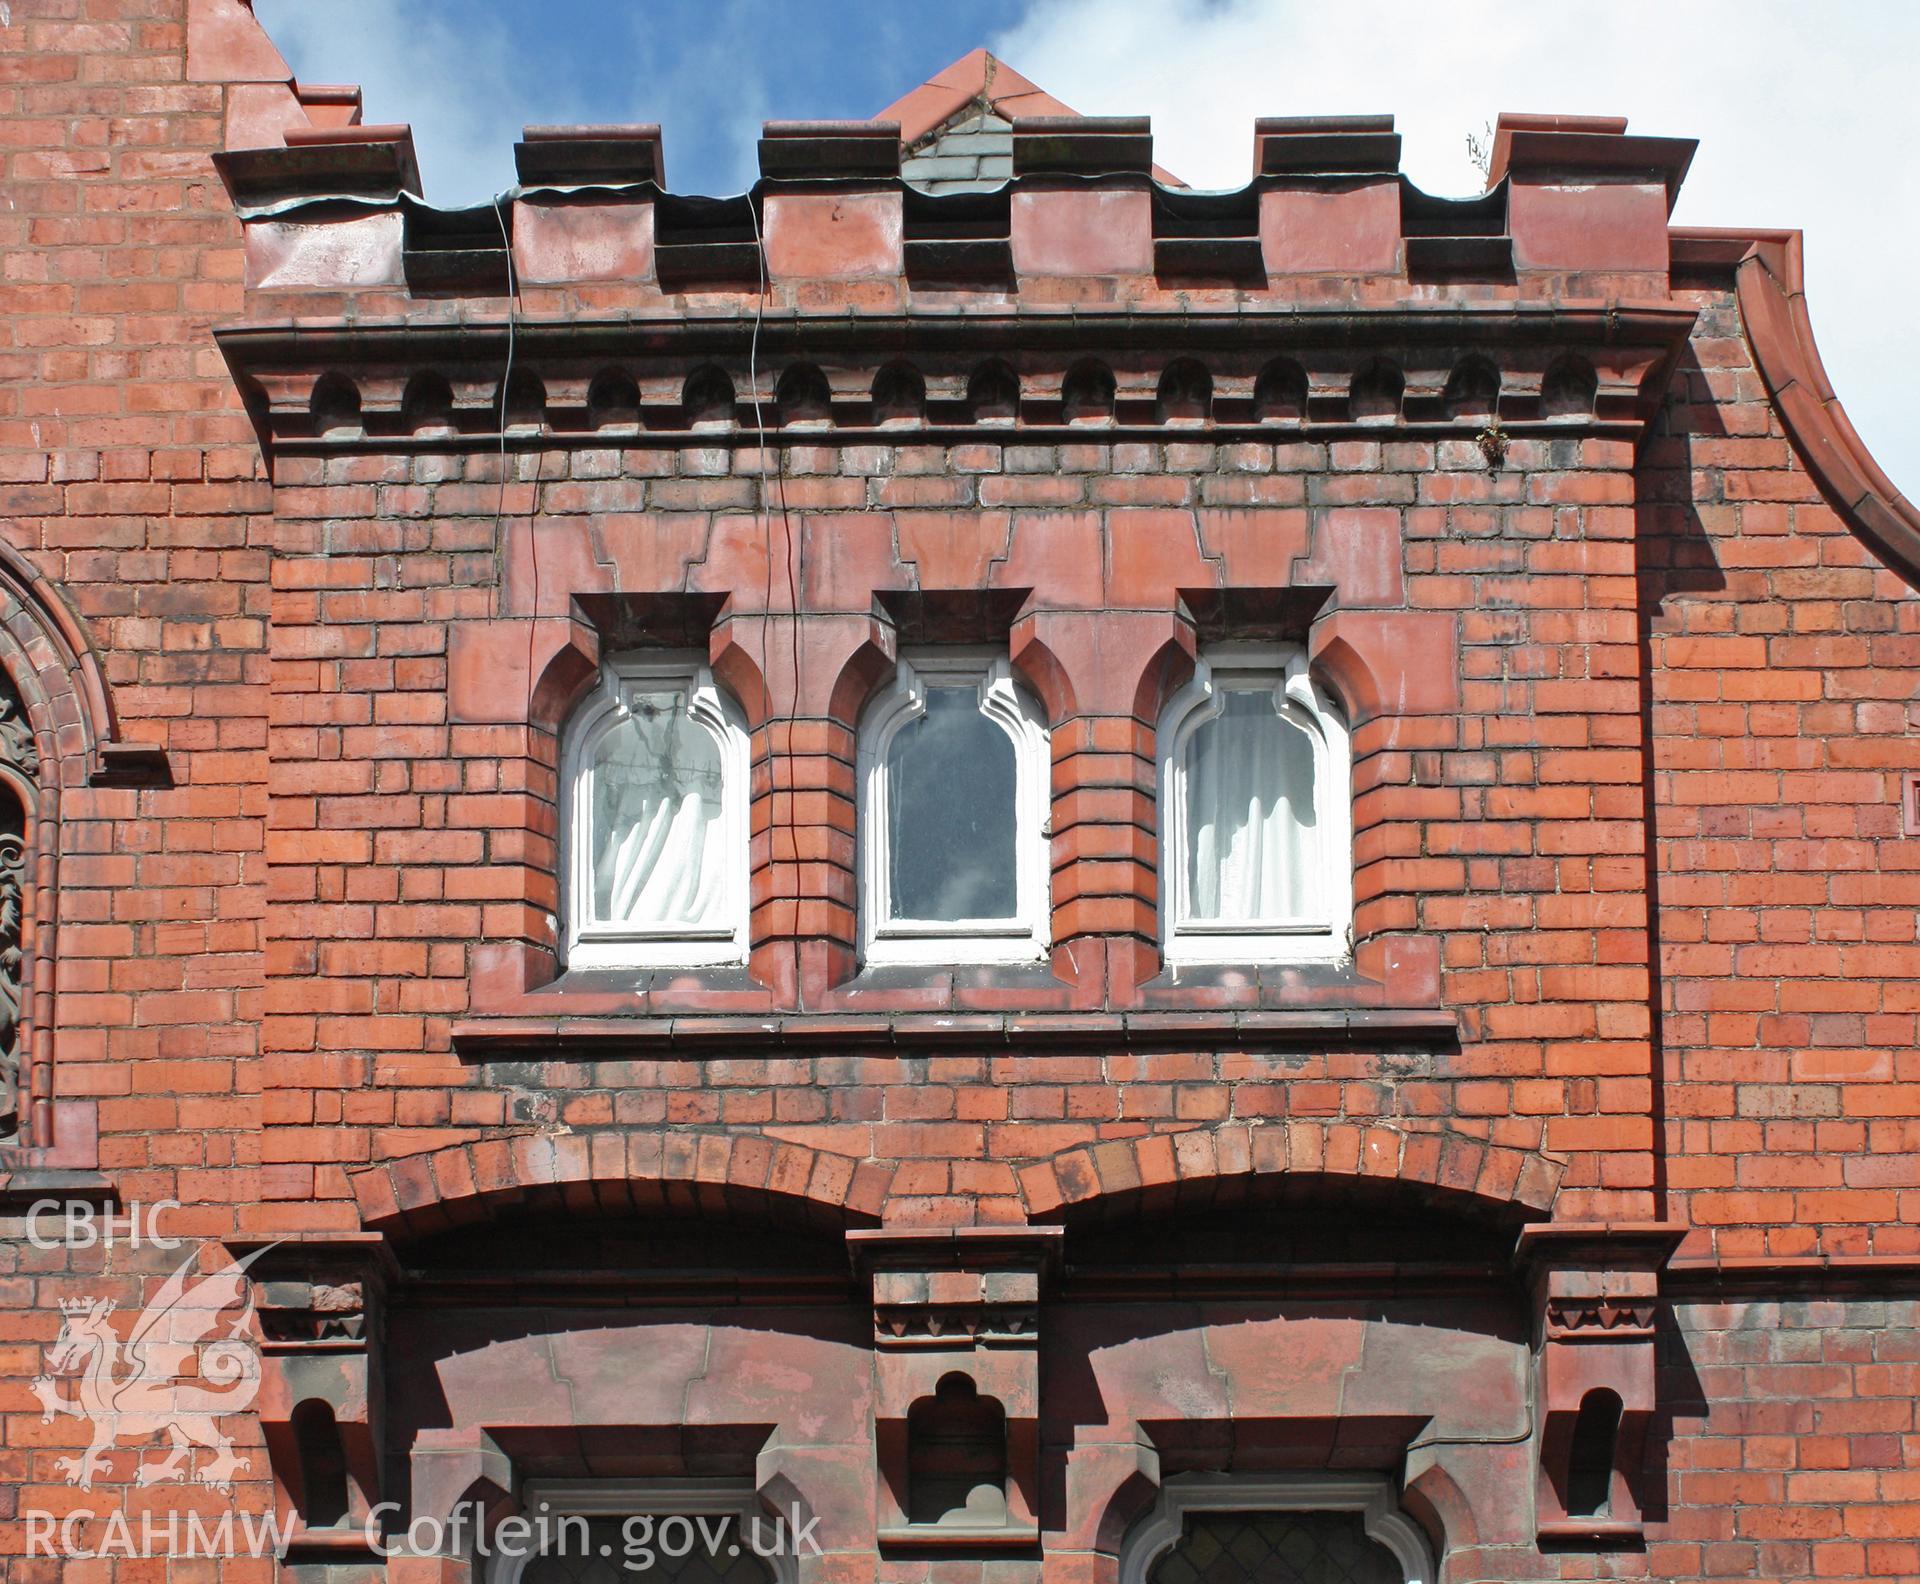 Colour photograph showing exterior detail of windows at Denbigh Conservative or Constitutional Club, Photographed during survey conducted by Geoff Ward on 19th July 2012.